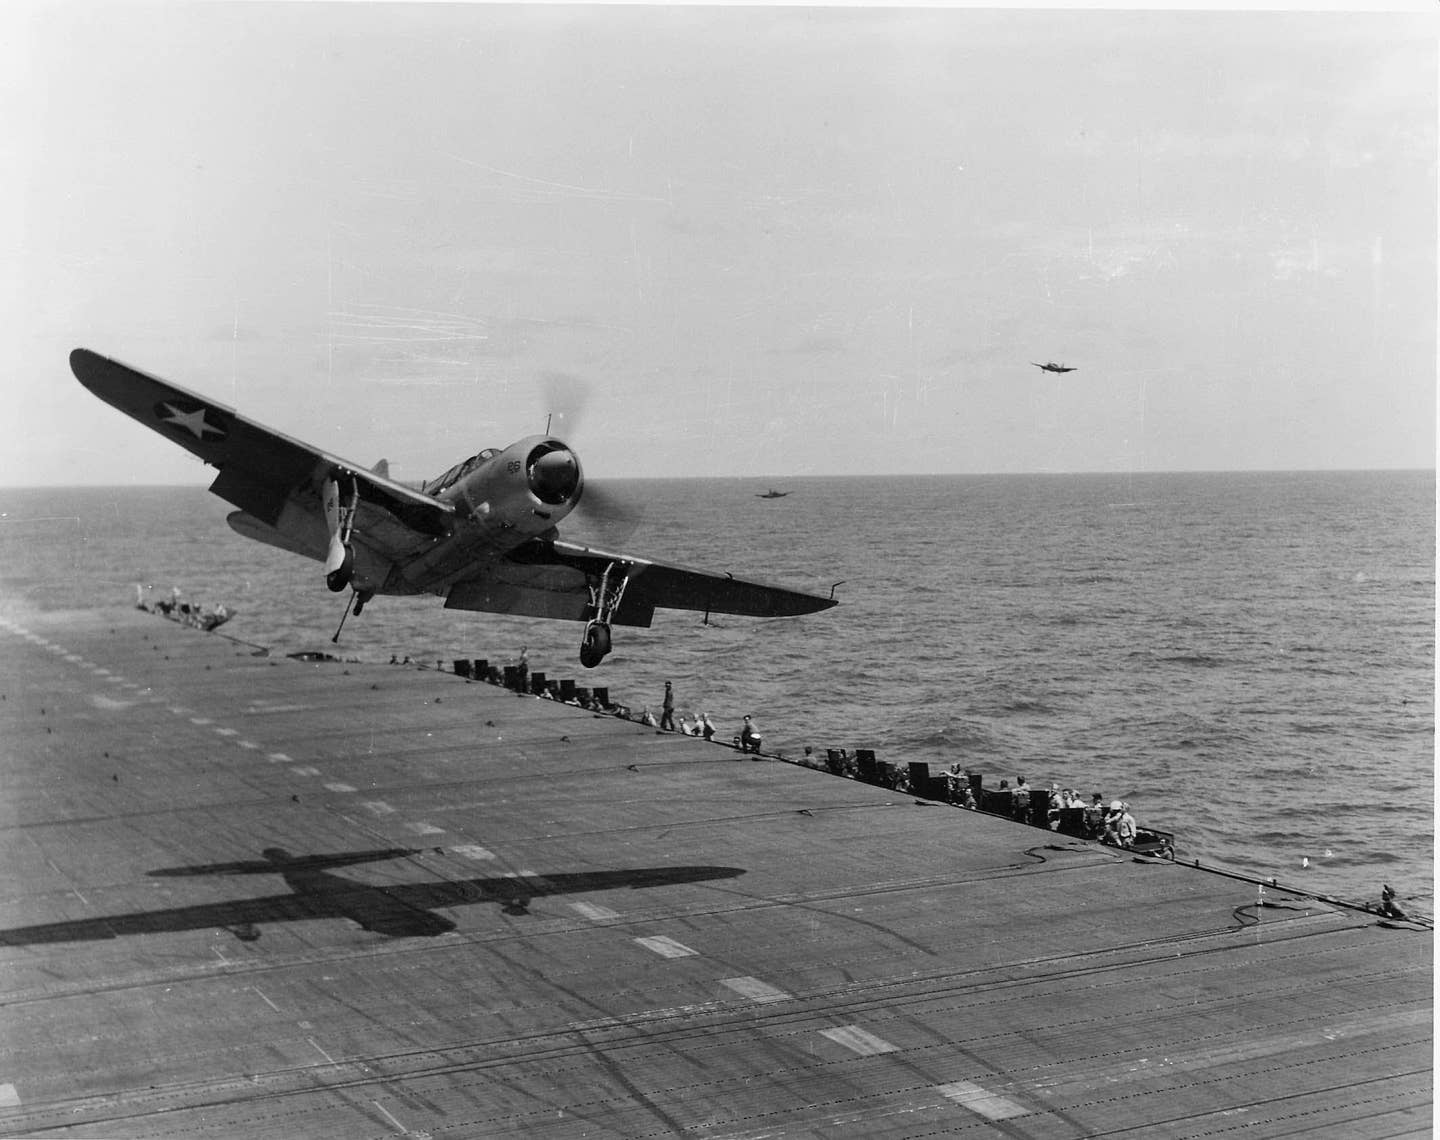 A U.S. Navy SB2C-1 Helldiver of Bombing Squadron 17 (VB-17) takes a wave-off during flight operations aboard the aircraft carrier USS <em>Bunker Hill </em>(CV-17) in the Caribbean, in 1943. <em>USN</em>